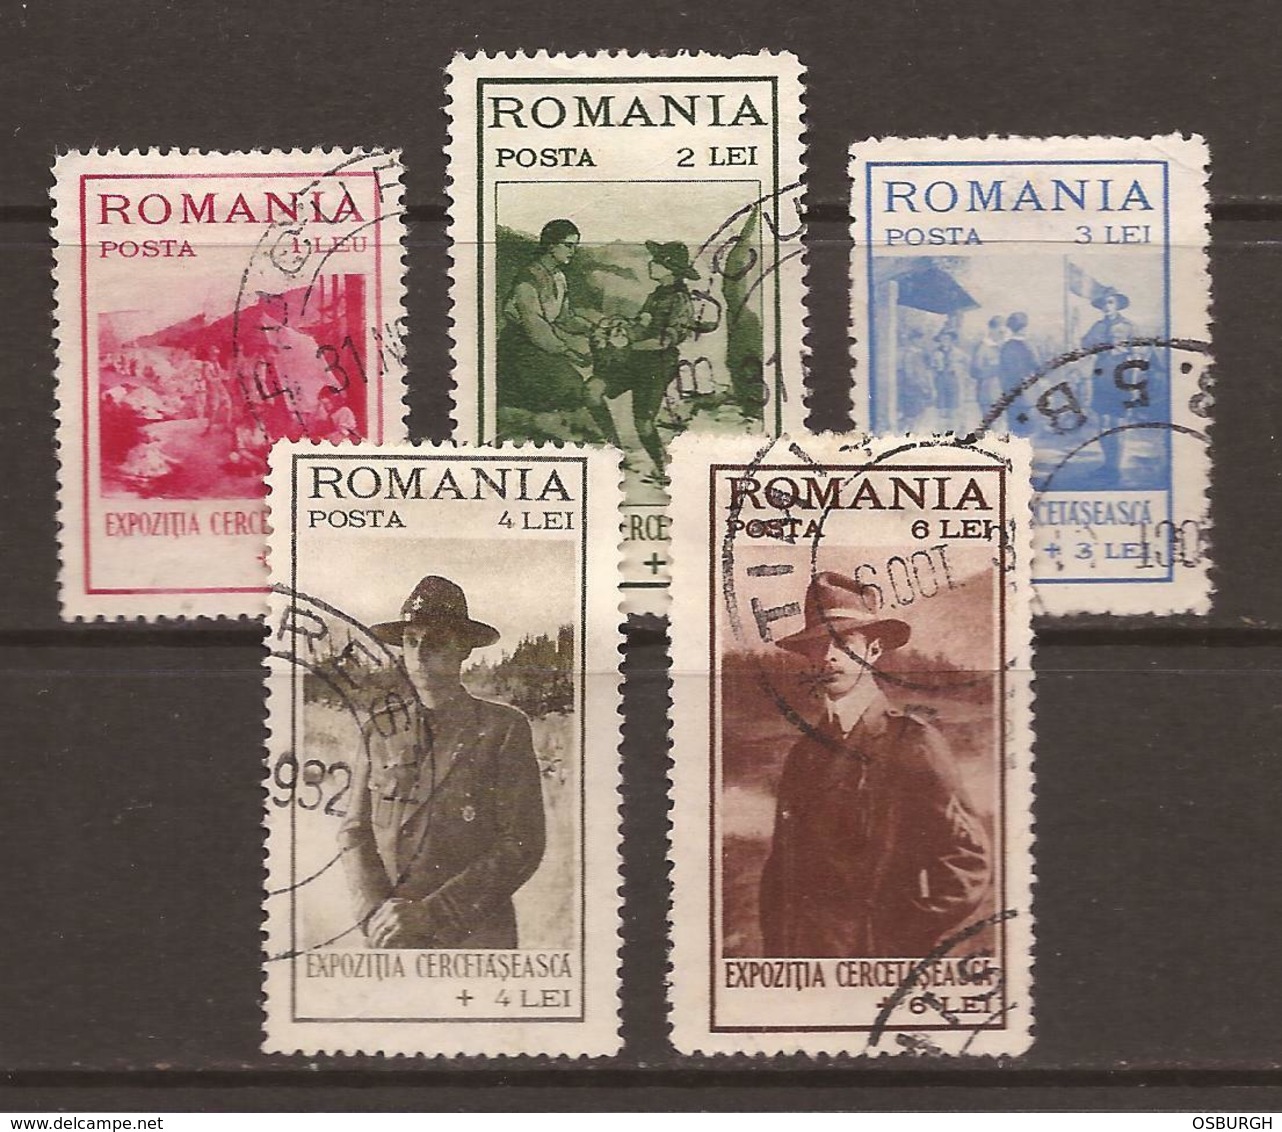 ROMANIA. 1931 SCOUTING SET USED. - Used Stamps